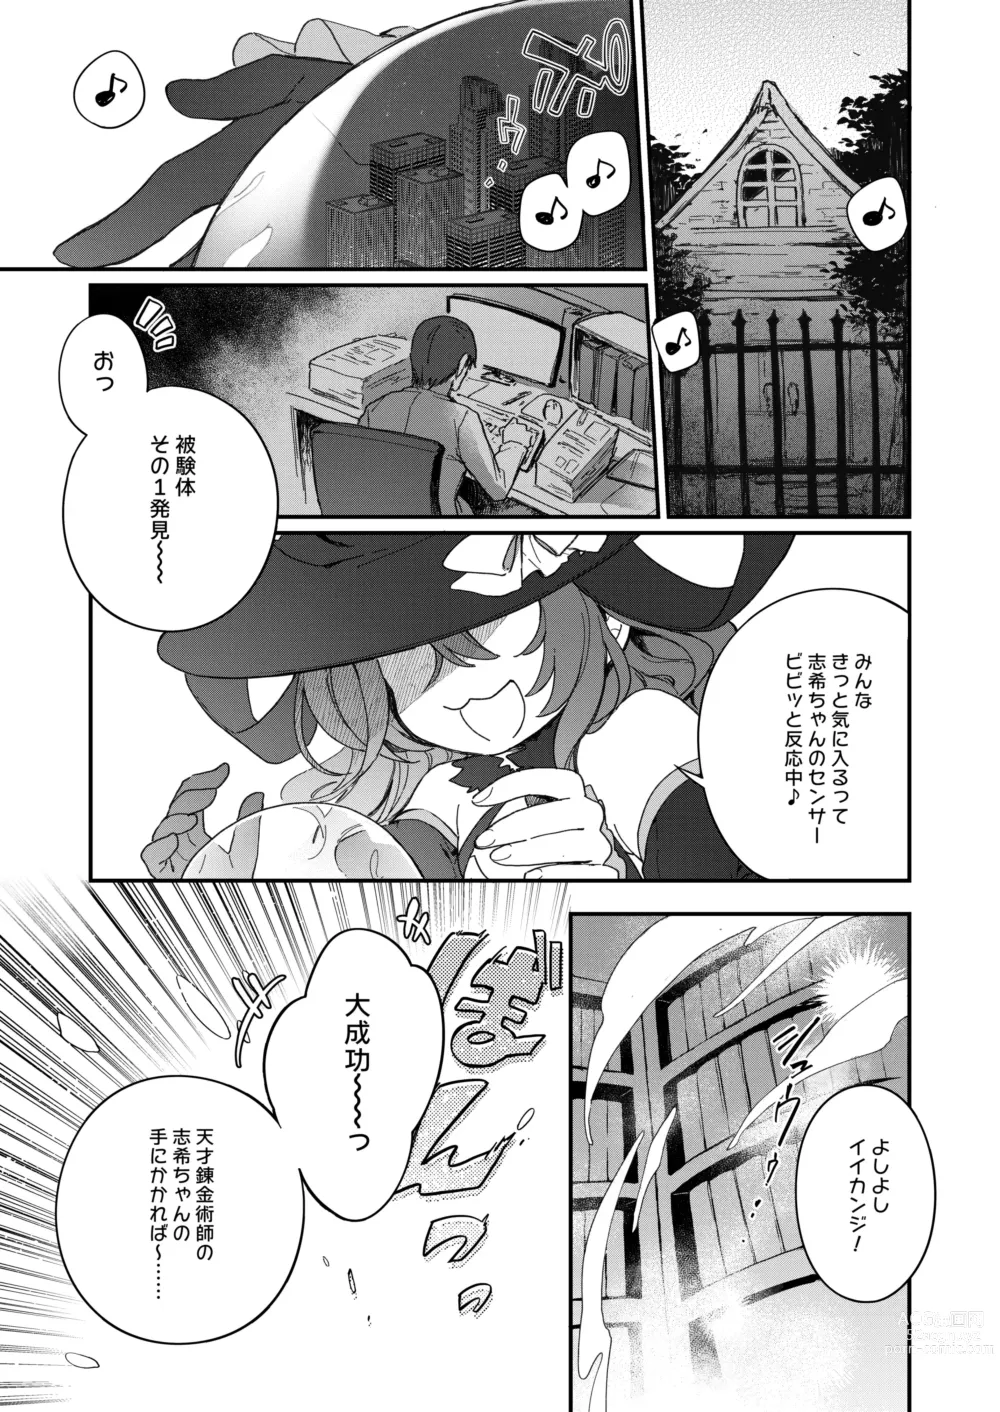 Page 2 of doujinshi Harem Halloween Party